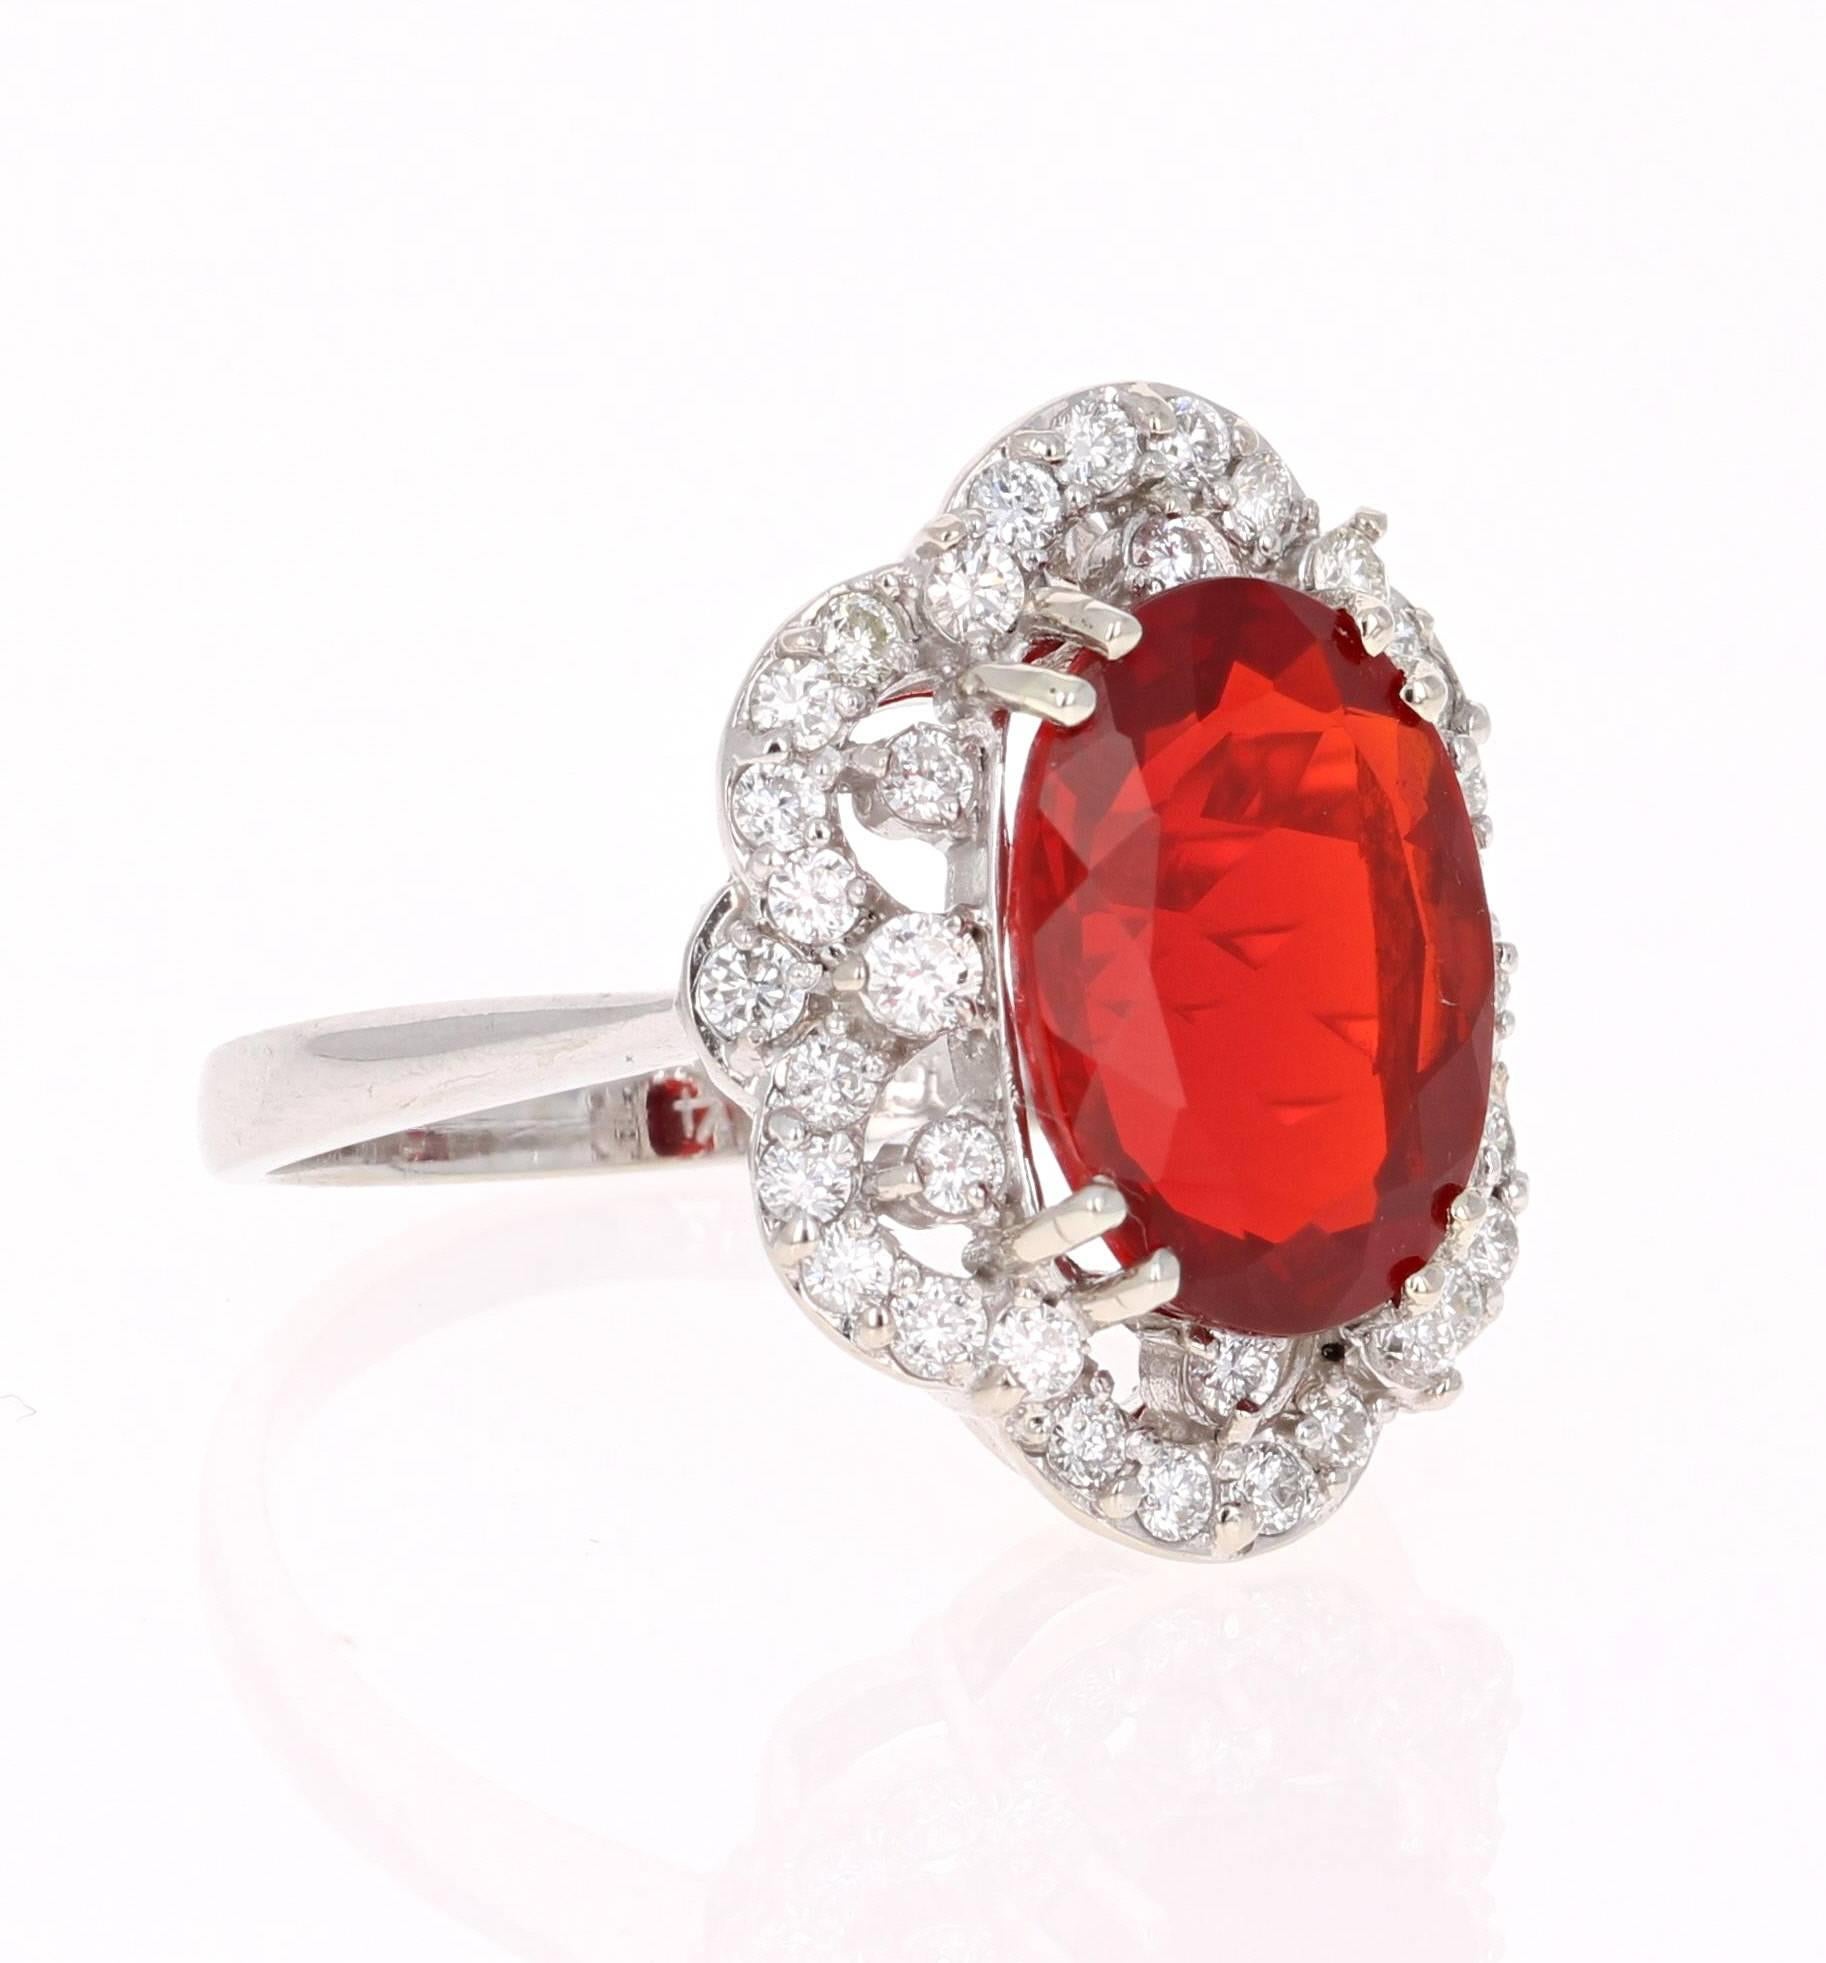 This bright and bold cocktail ring has a scintillating Oval Cut Fire Opal that weighs 3.45 carats and 36 Round Cut Diamonds that weigh 0.64 carats. The clarity and color of the diamonds are VS2-H.  The total carat weight of the ring is 4.09 carats.